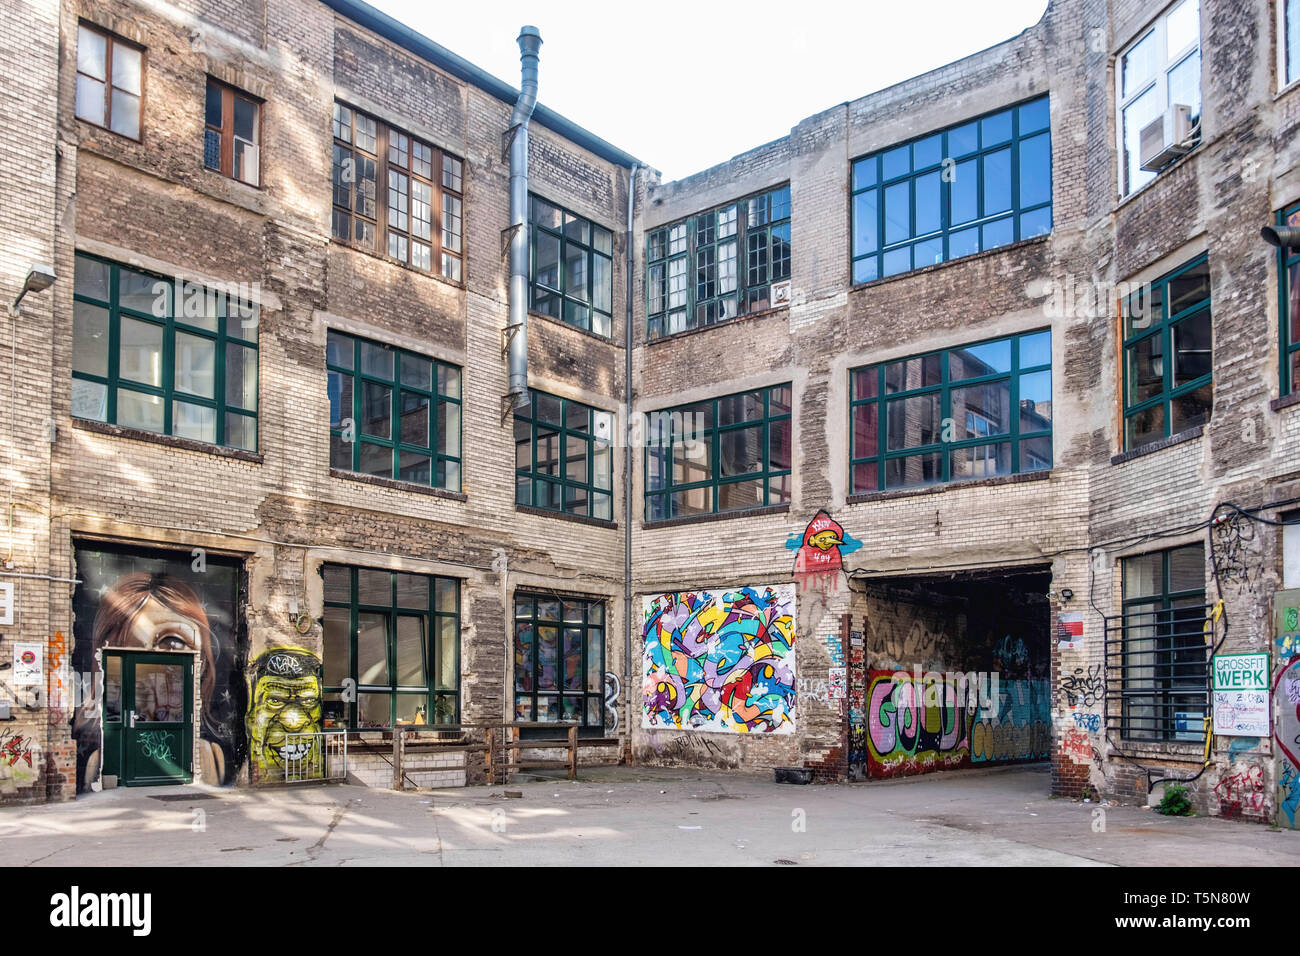 Wedding, Berlin. Inner courtyard of dilapidated old industrial building next to Panke river at Gerichtstrasse 23. Residential & business use. Stock Photo